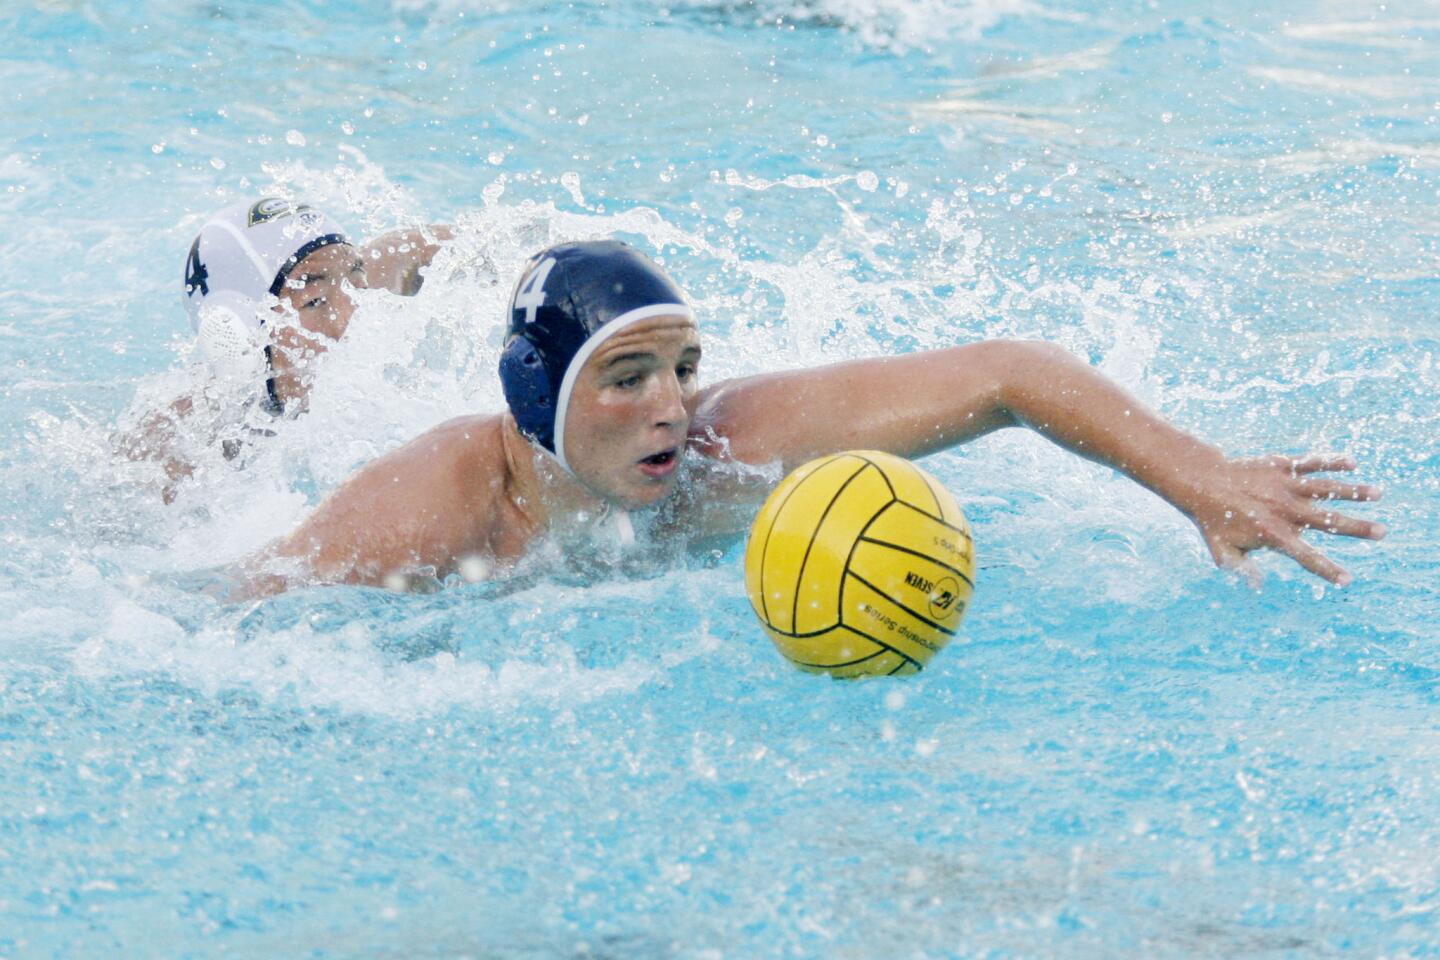 CV's Griffin Harting takes possession over the ball during a match against Cerritos at PCC on Wednesday, October 3, 2012.